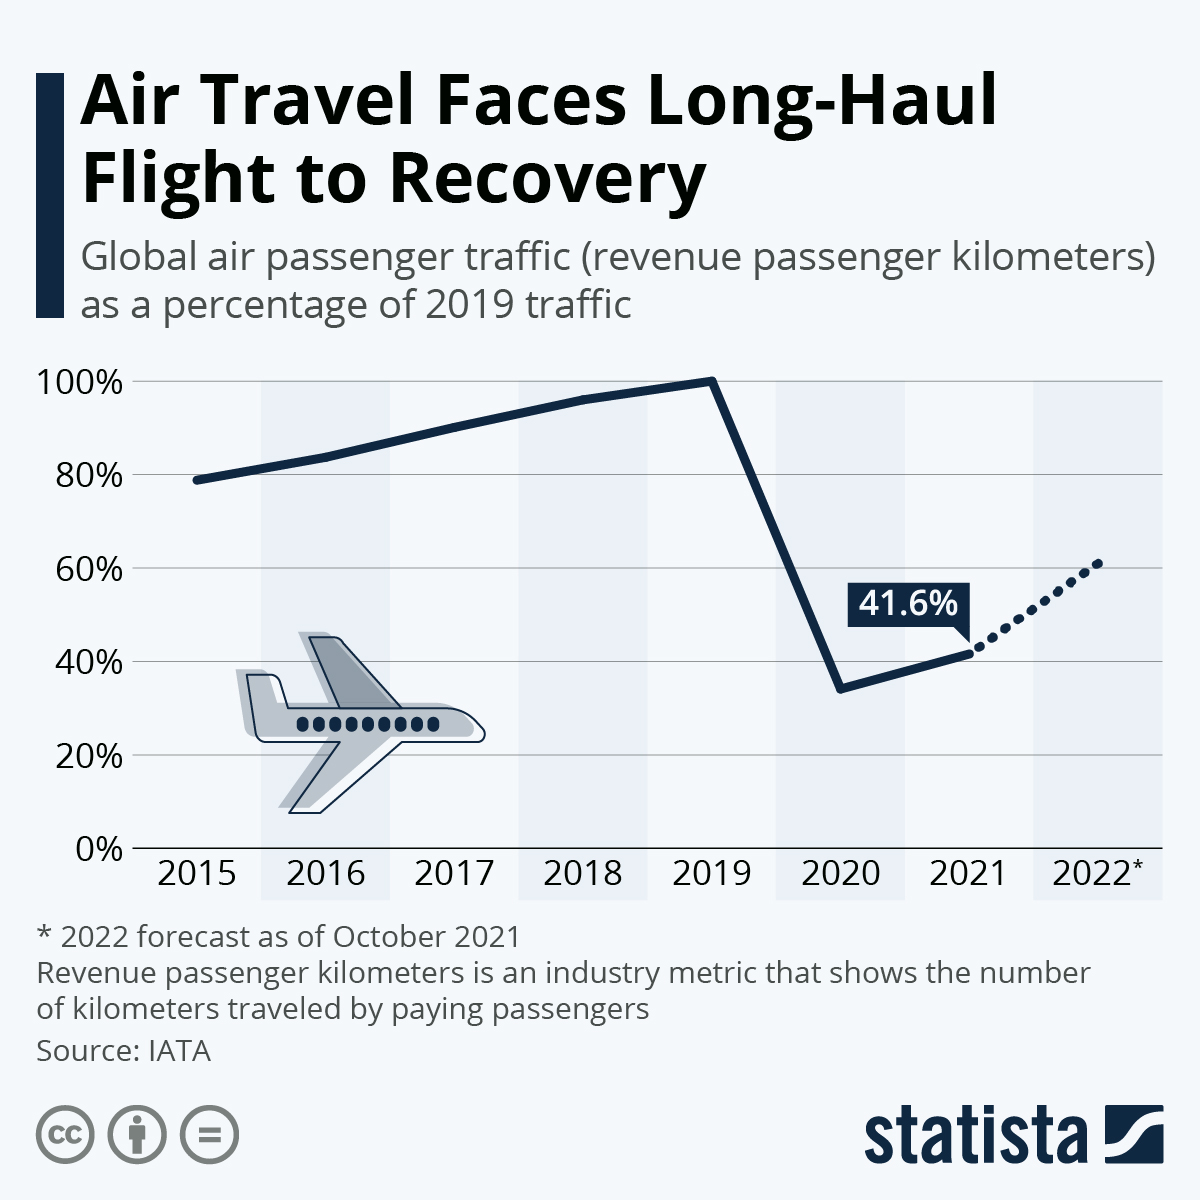 Air Travel Faces Long-Haul Flight to Recovery
